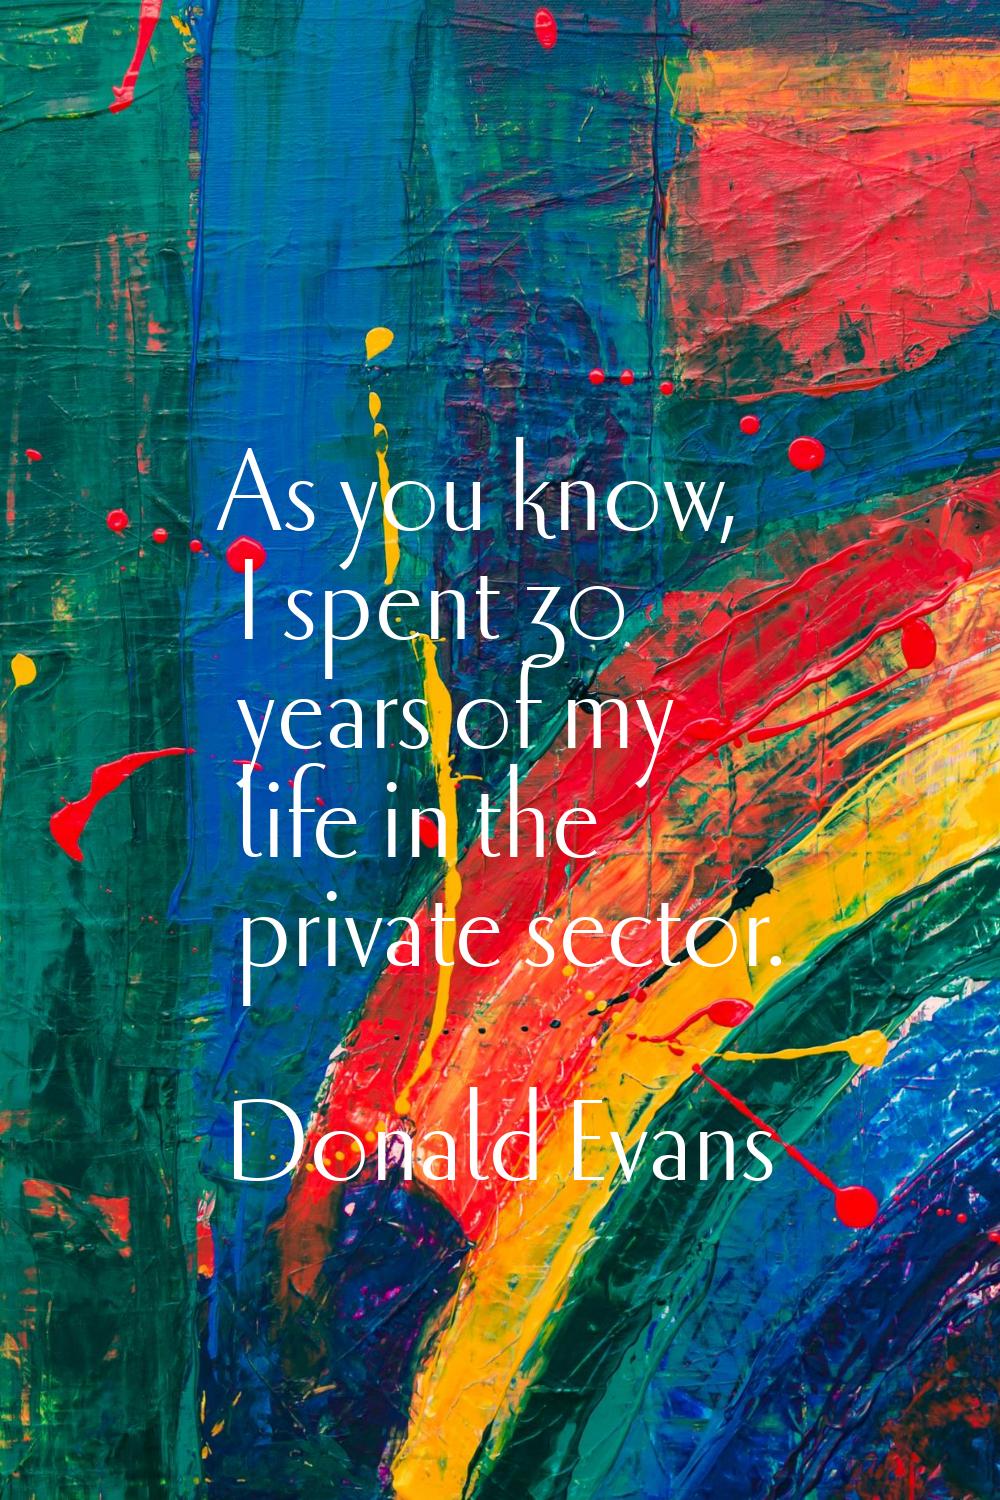 As you know, I spent 30 years of my life in the private sector.